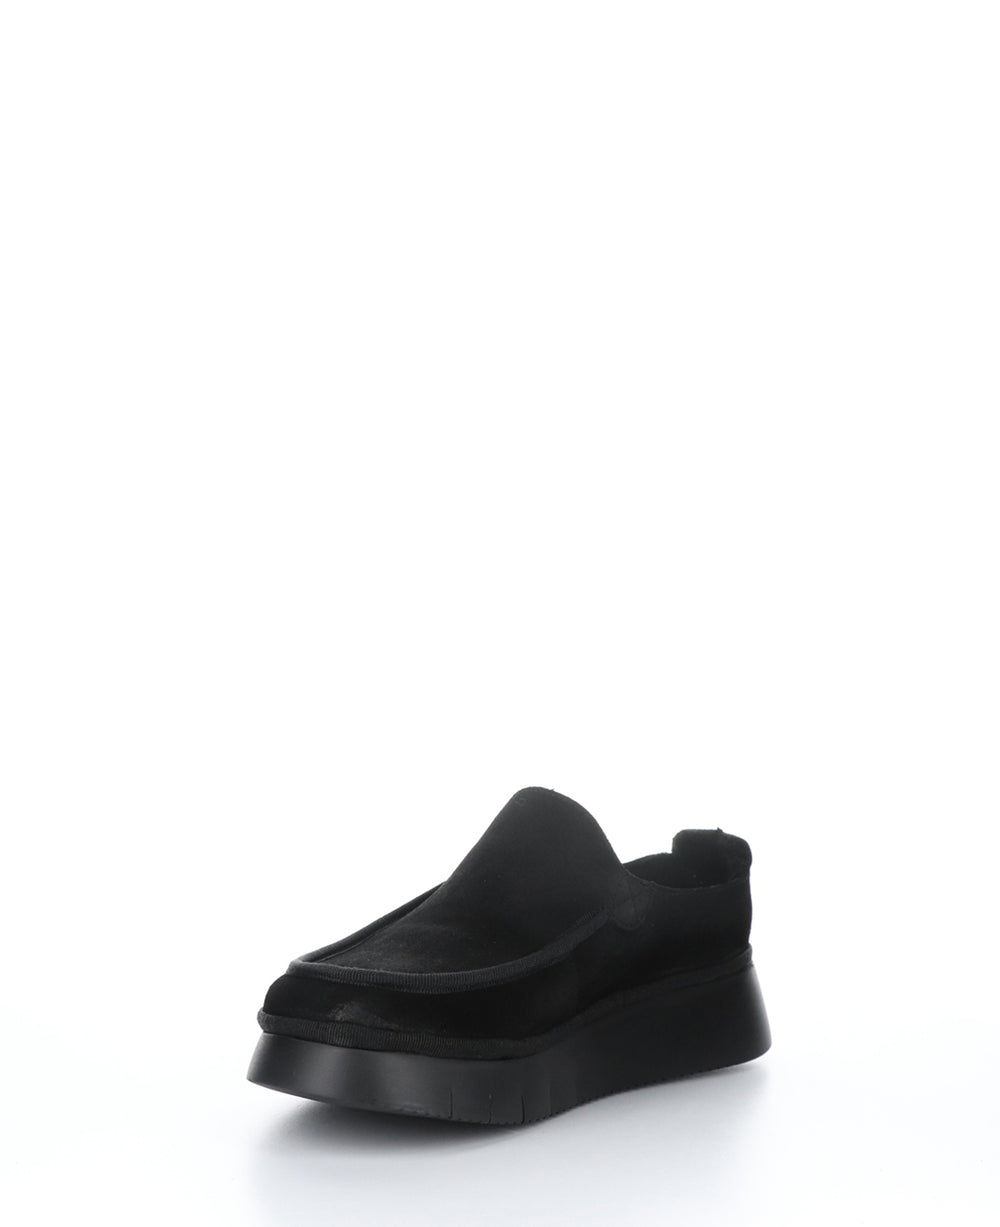 CEZE361FLY BLACK Round Toe Clogs|CEZE361FLY Chaussures à Bout Rond in Noir